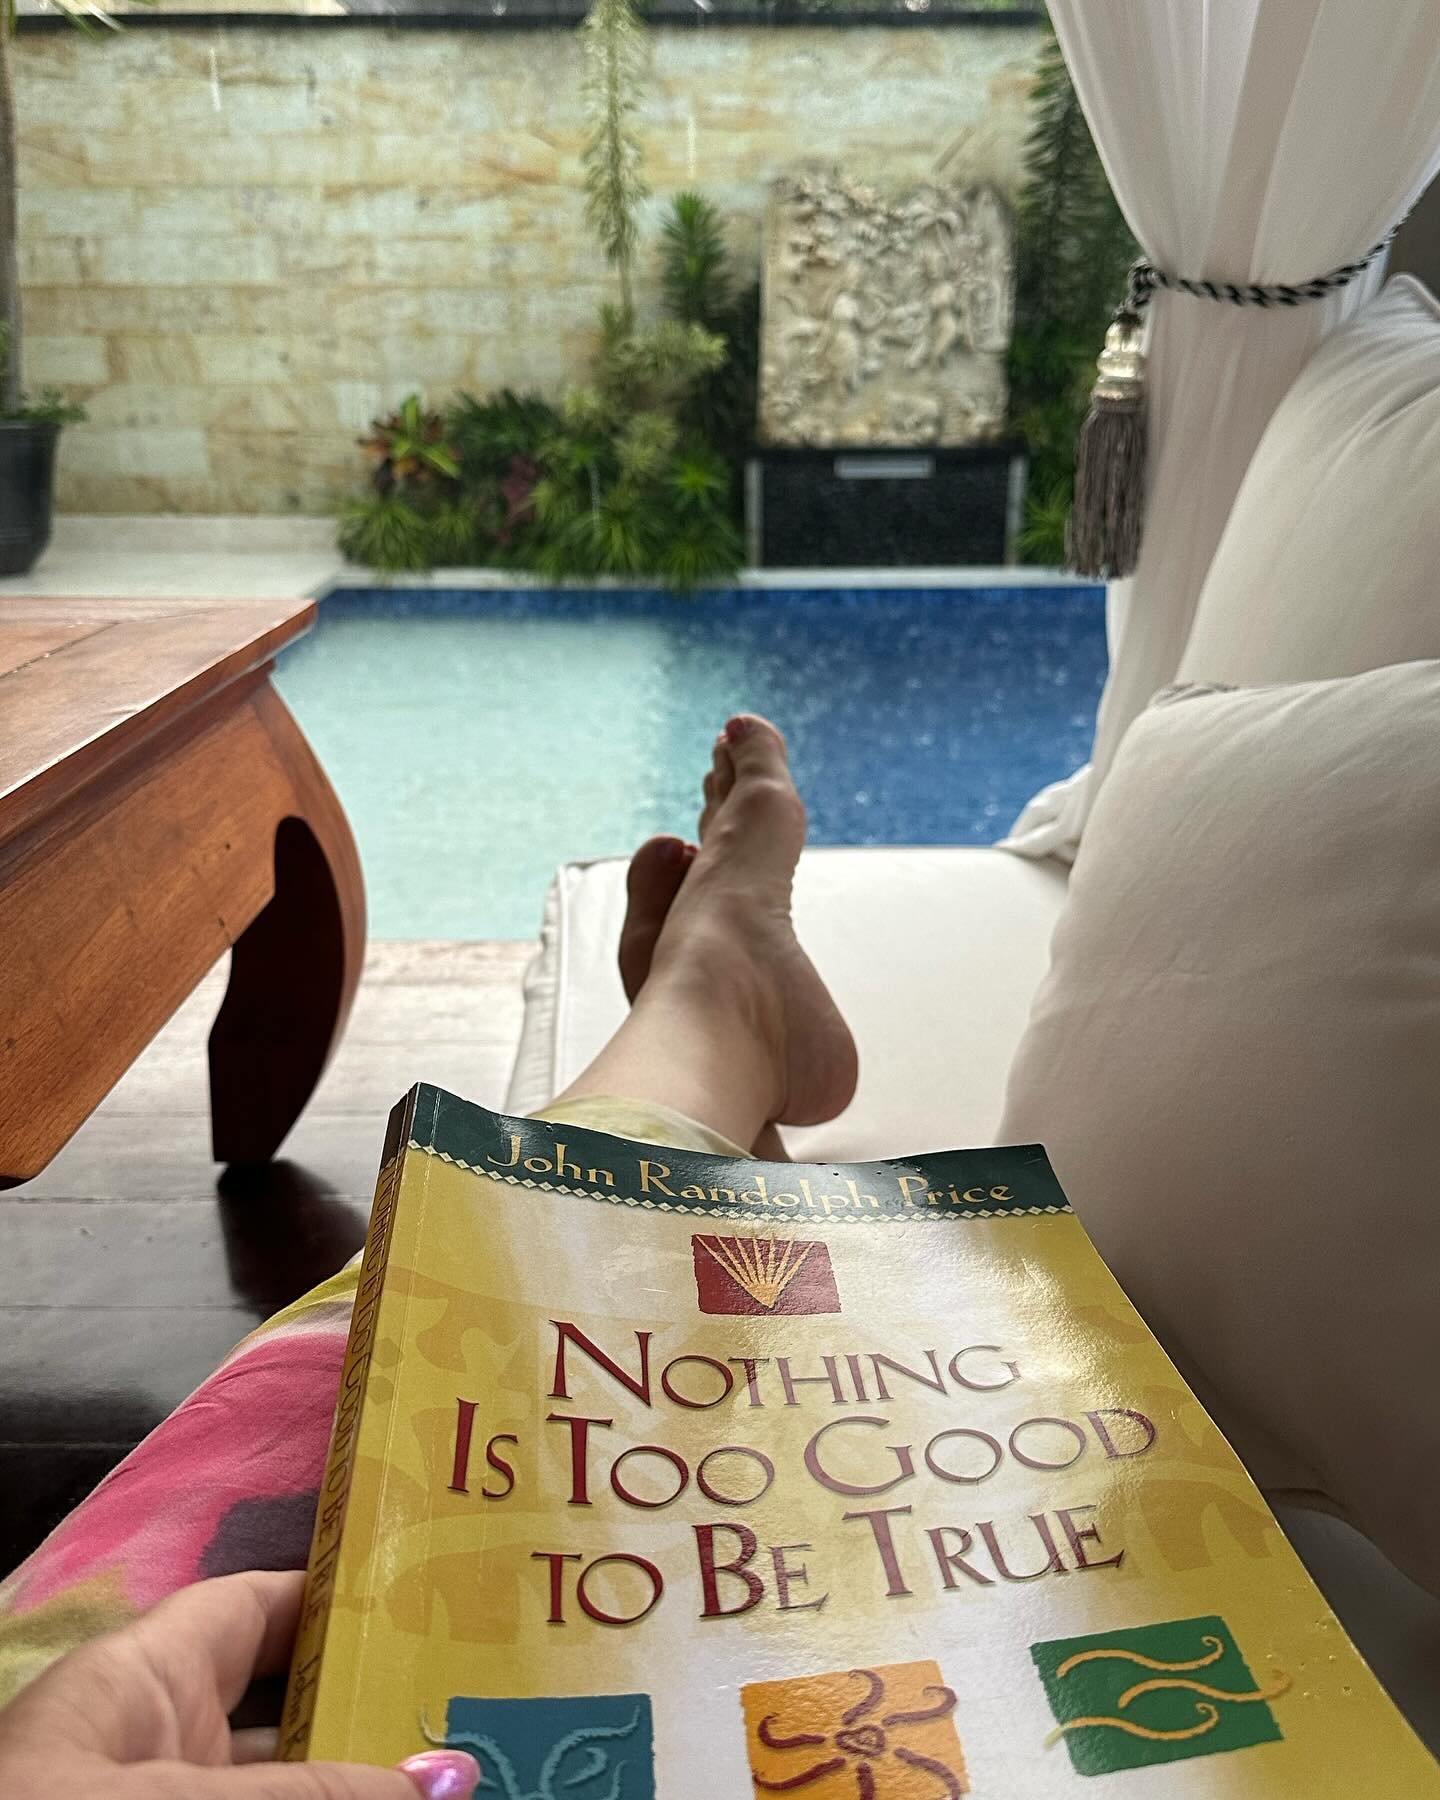 Today we leave Ubud for the coast. Oh my heart!! I&rsquo;ve been in opulence and abundance all week with this 5⭐️ group mastermind travel experience. 

I absolutely LOVE this book and John Randolph Price was definitely one of my favorite New Thought 